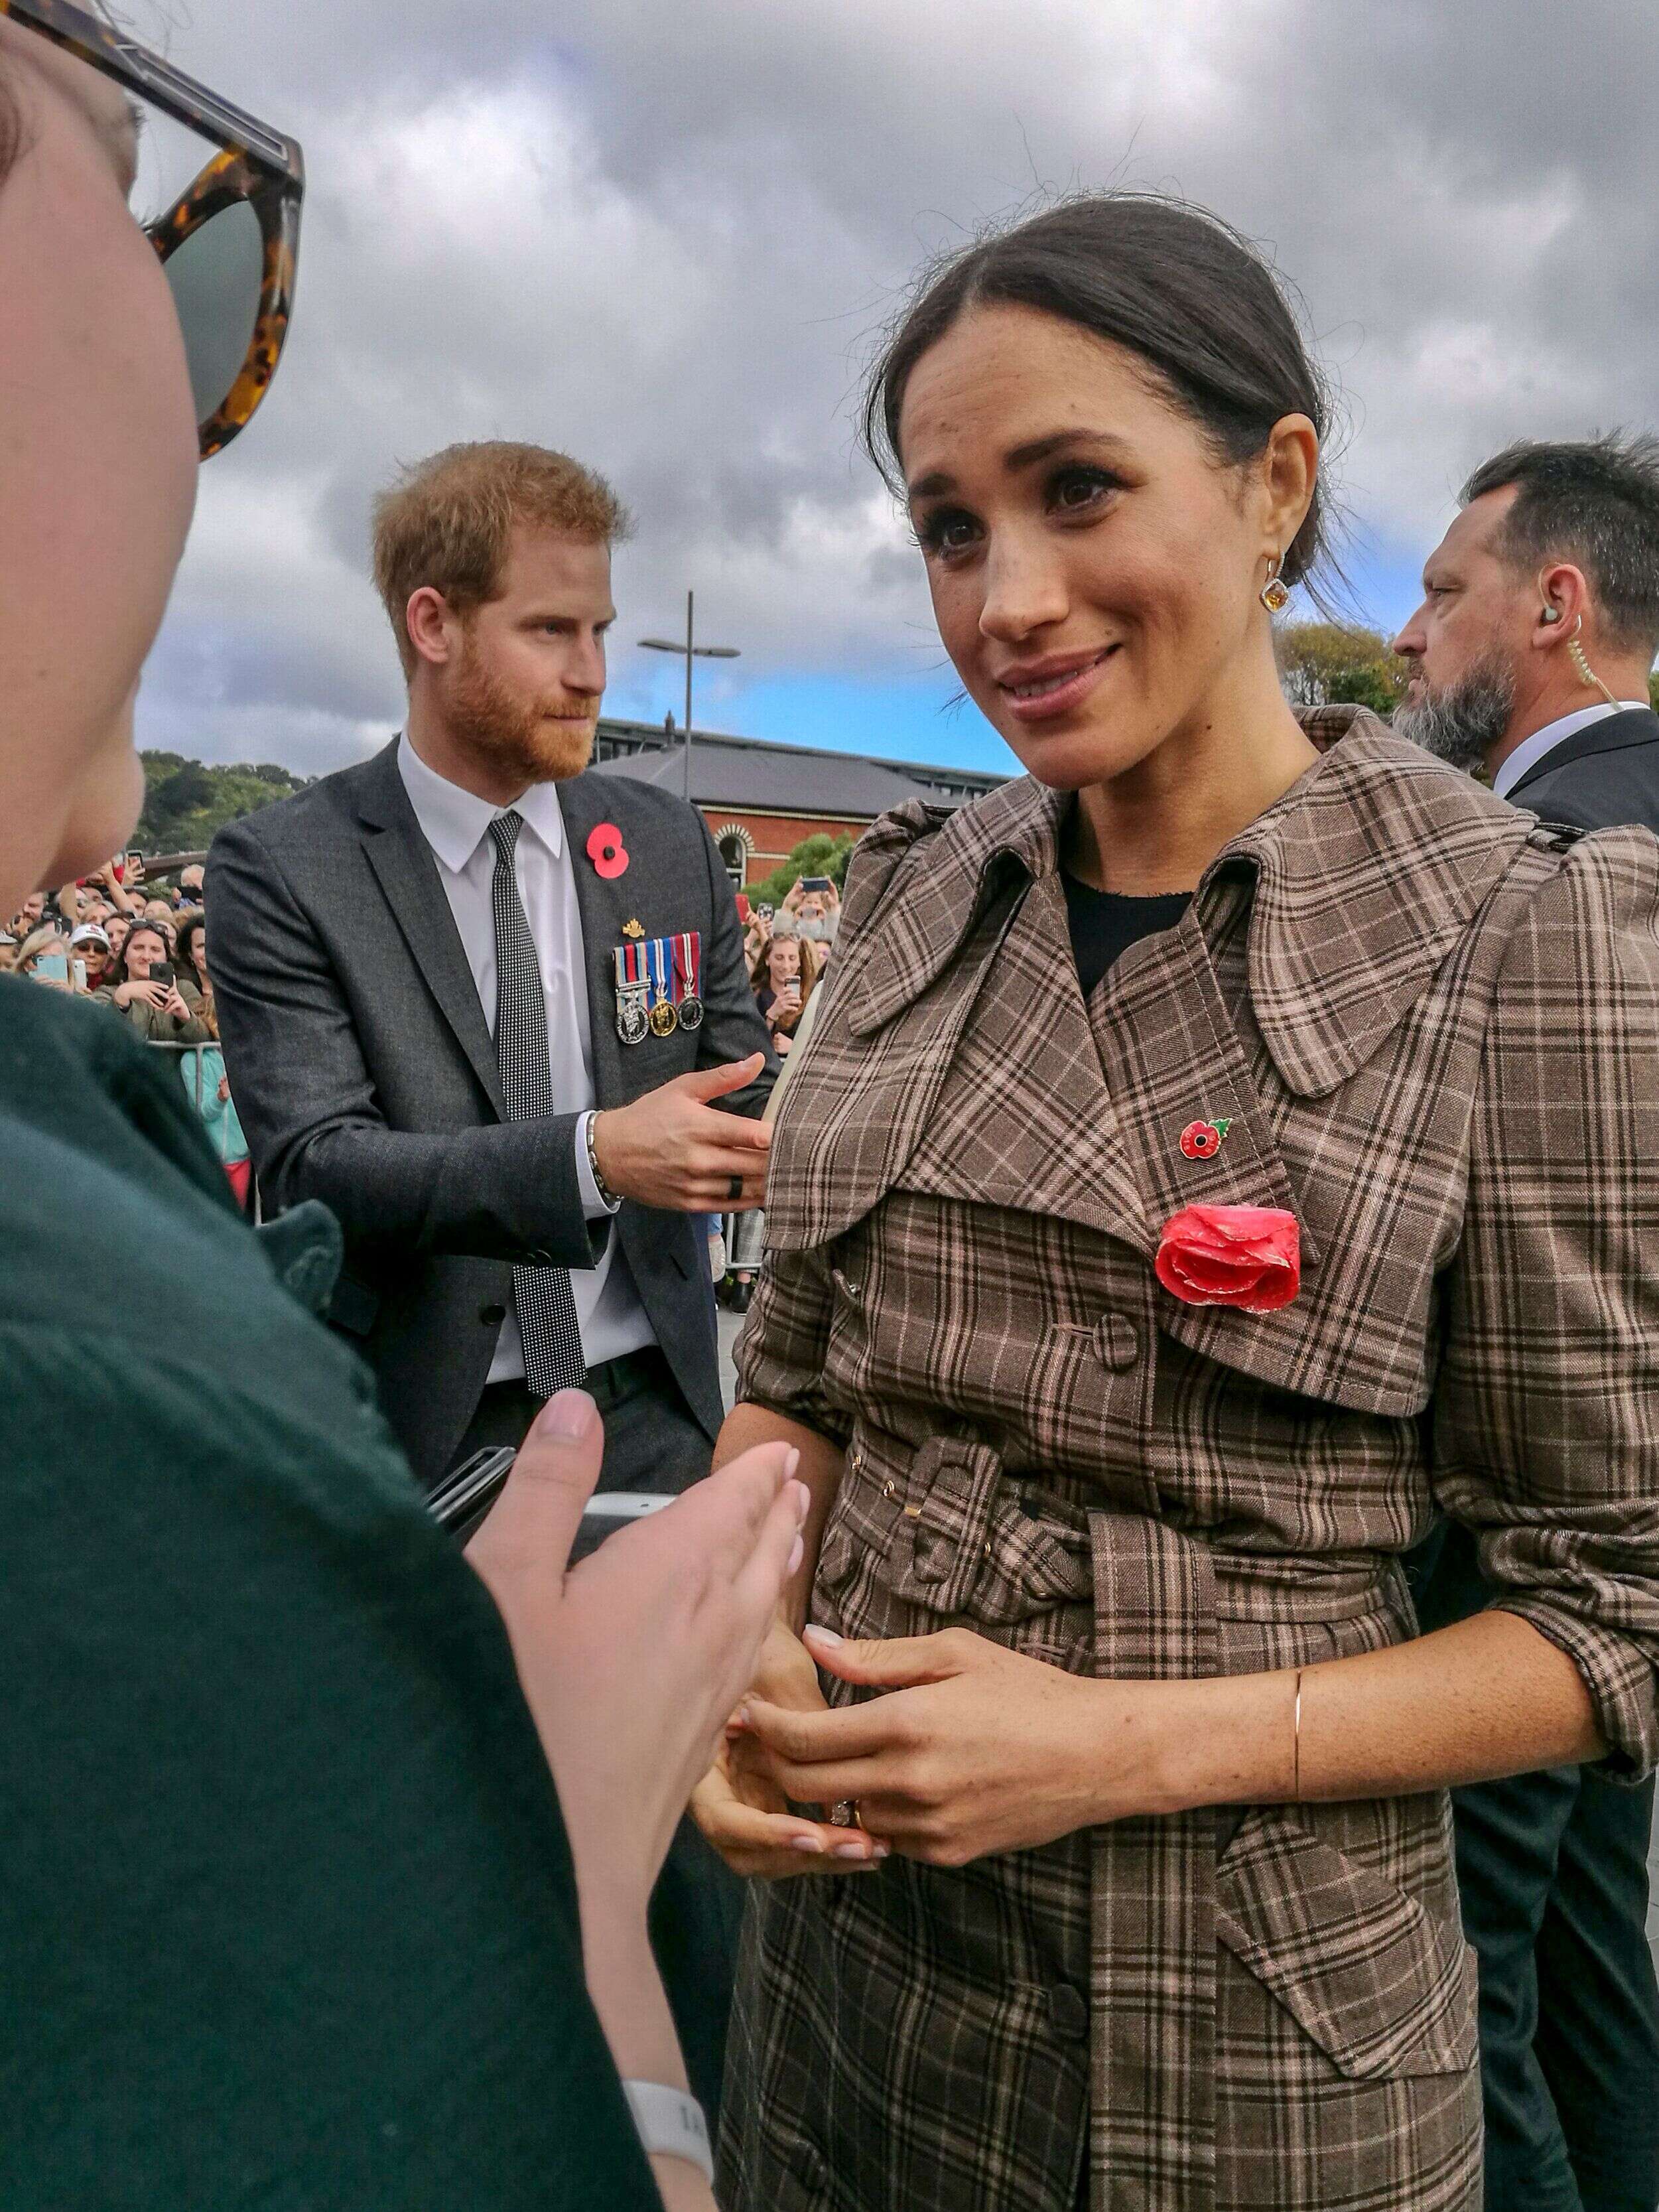 Wellington, New Zealand - October 28, 2018: The Duke and Duchess of Sussex chat with members of the crowd at the Wellington War Memorial in New Zealand.